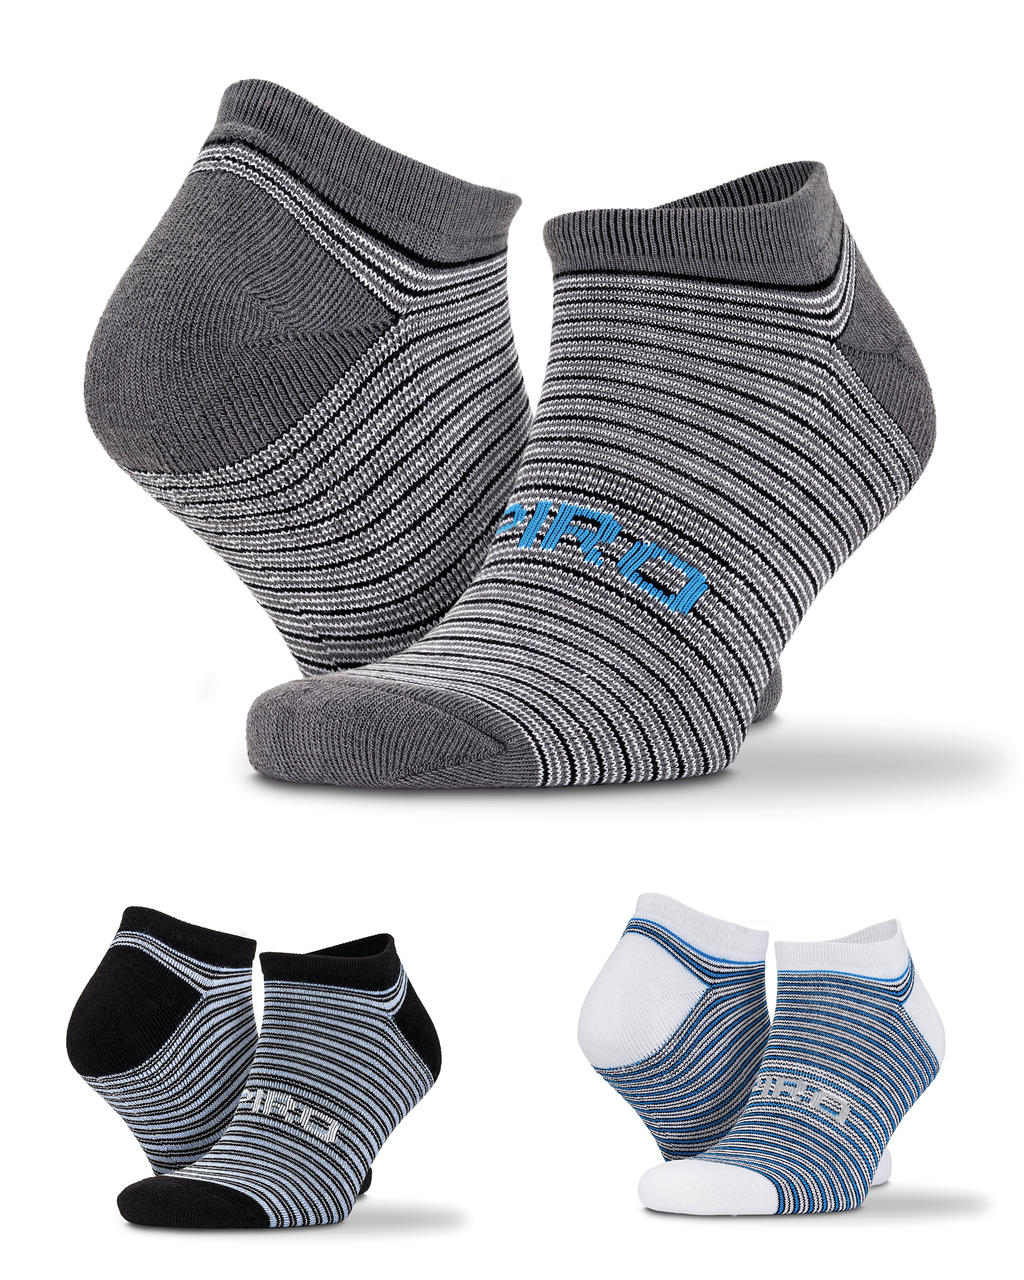  3-Pack Mixed Stripe Sneaker Socks in Farbe Color Mix 2